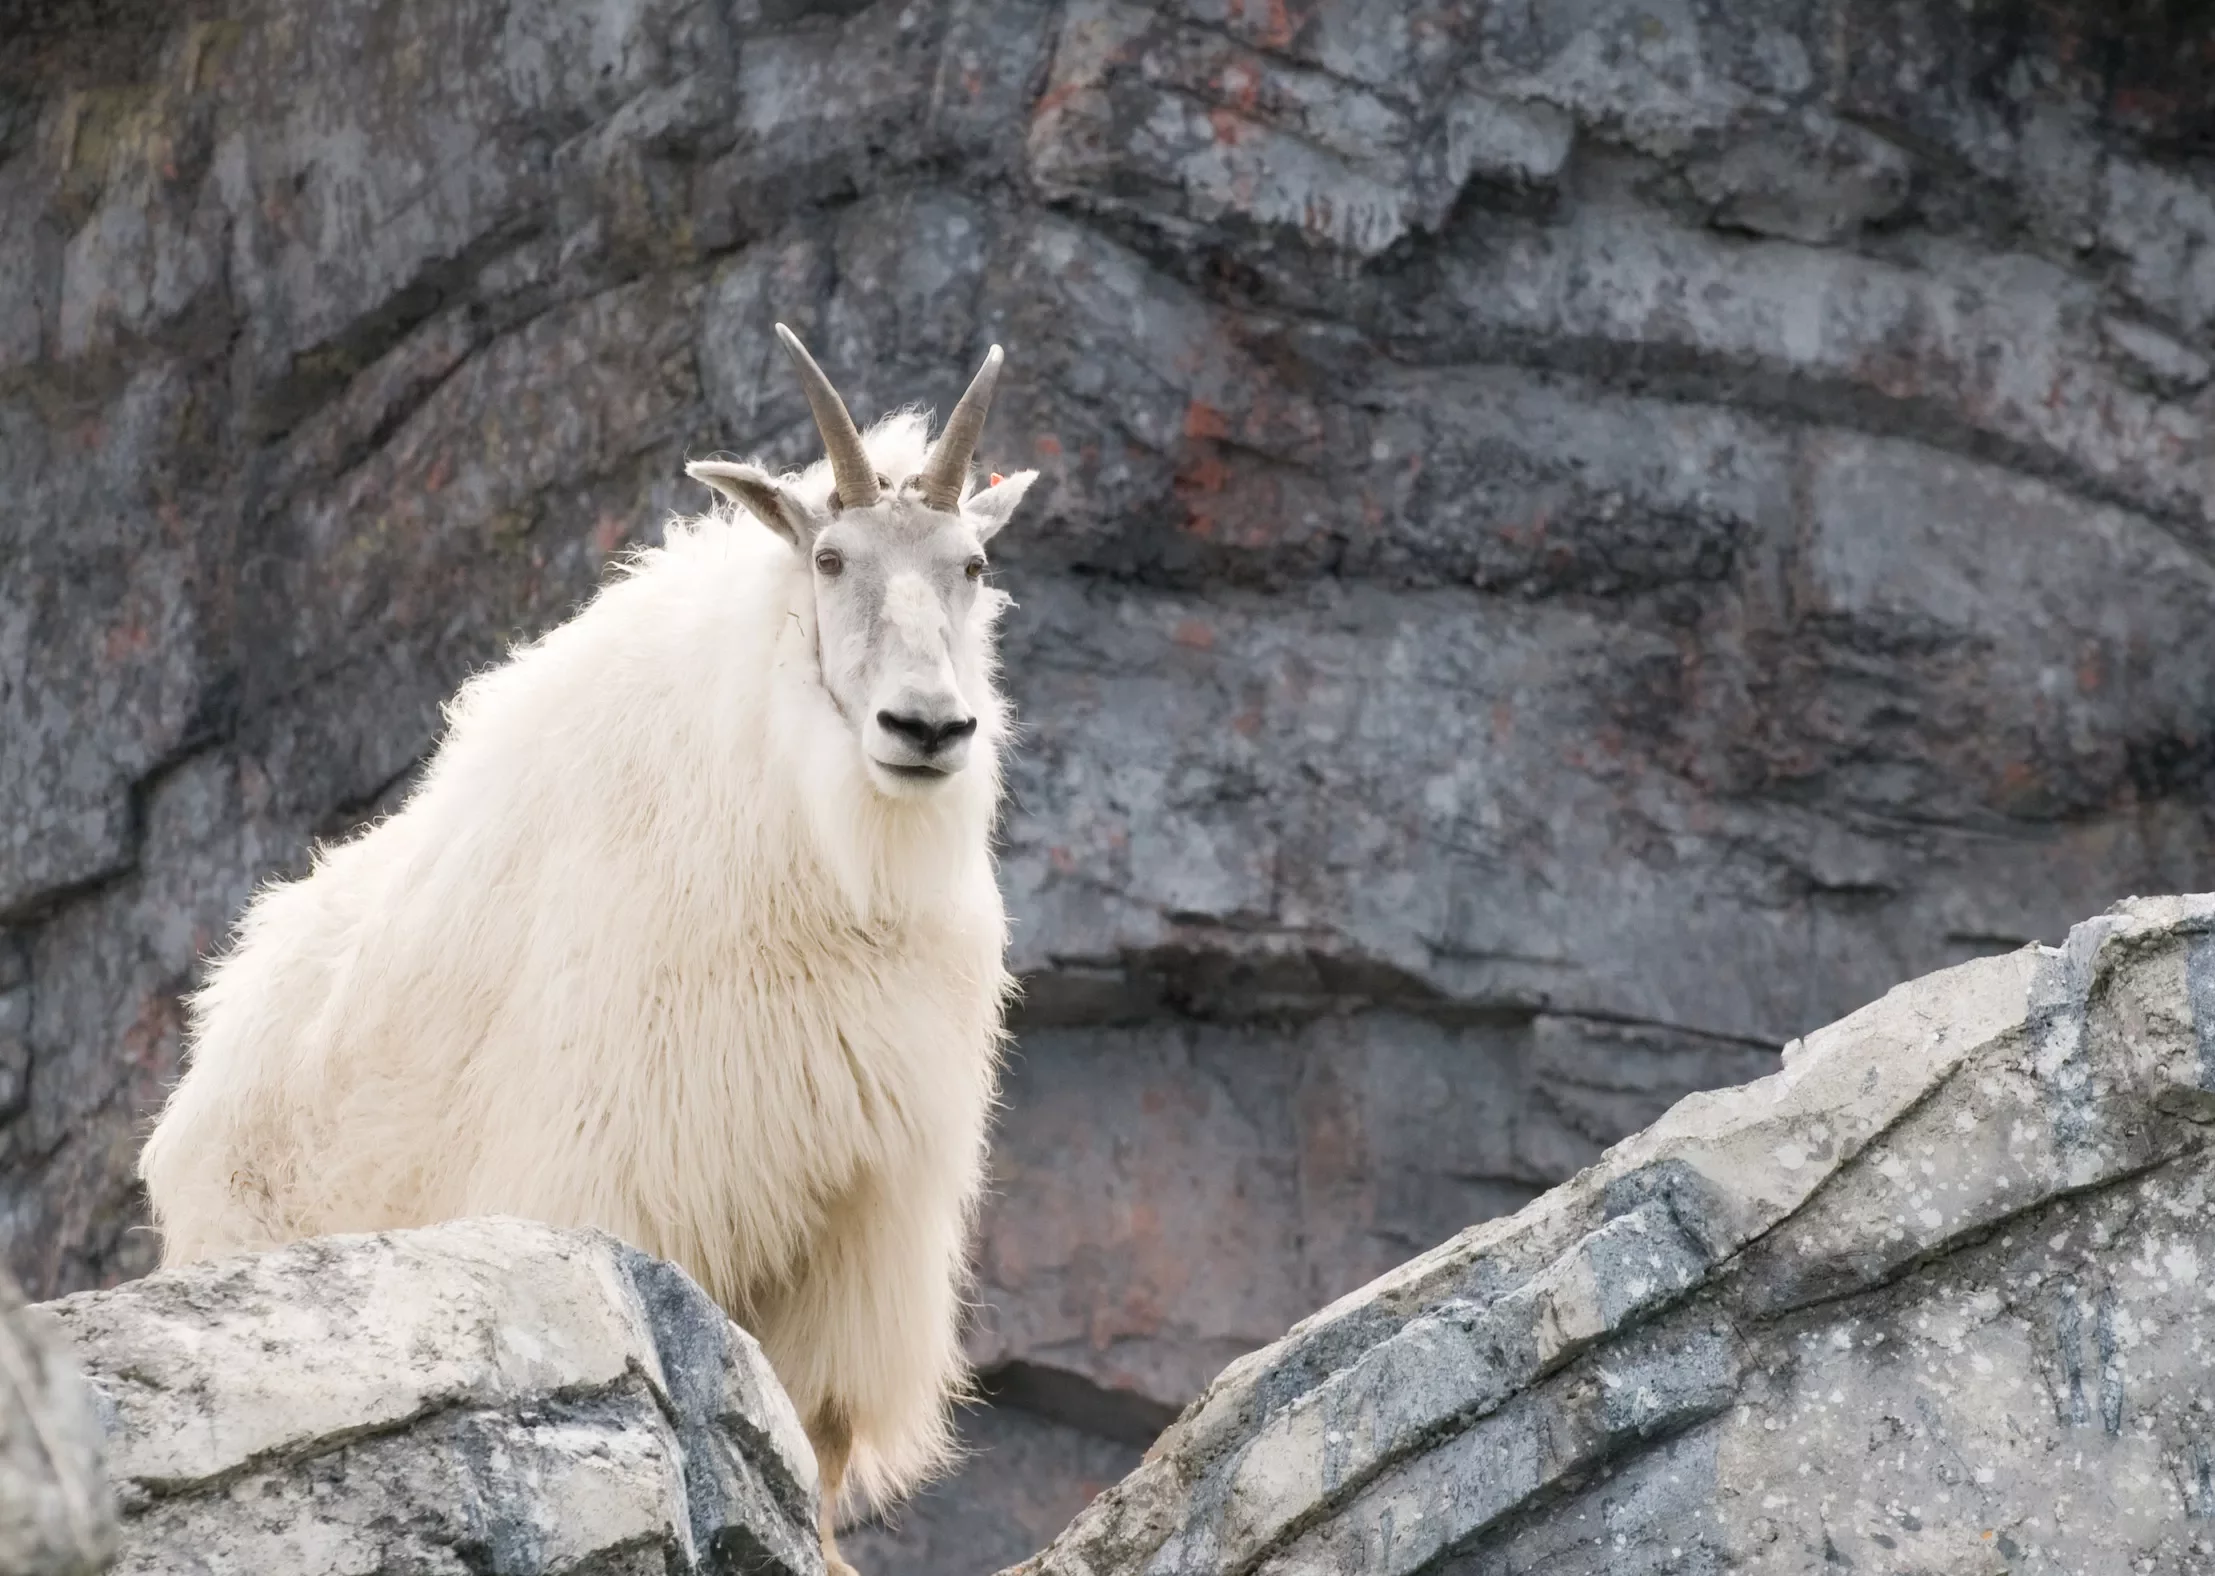 Close-up of Mountain Goat.